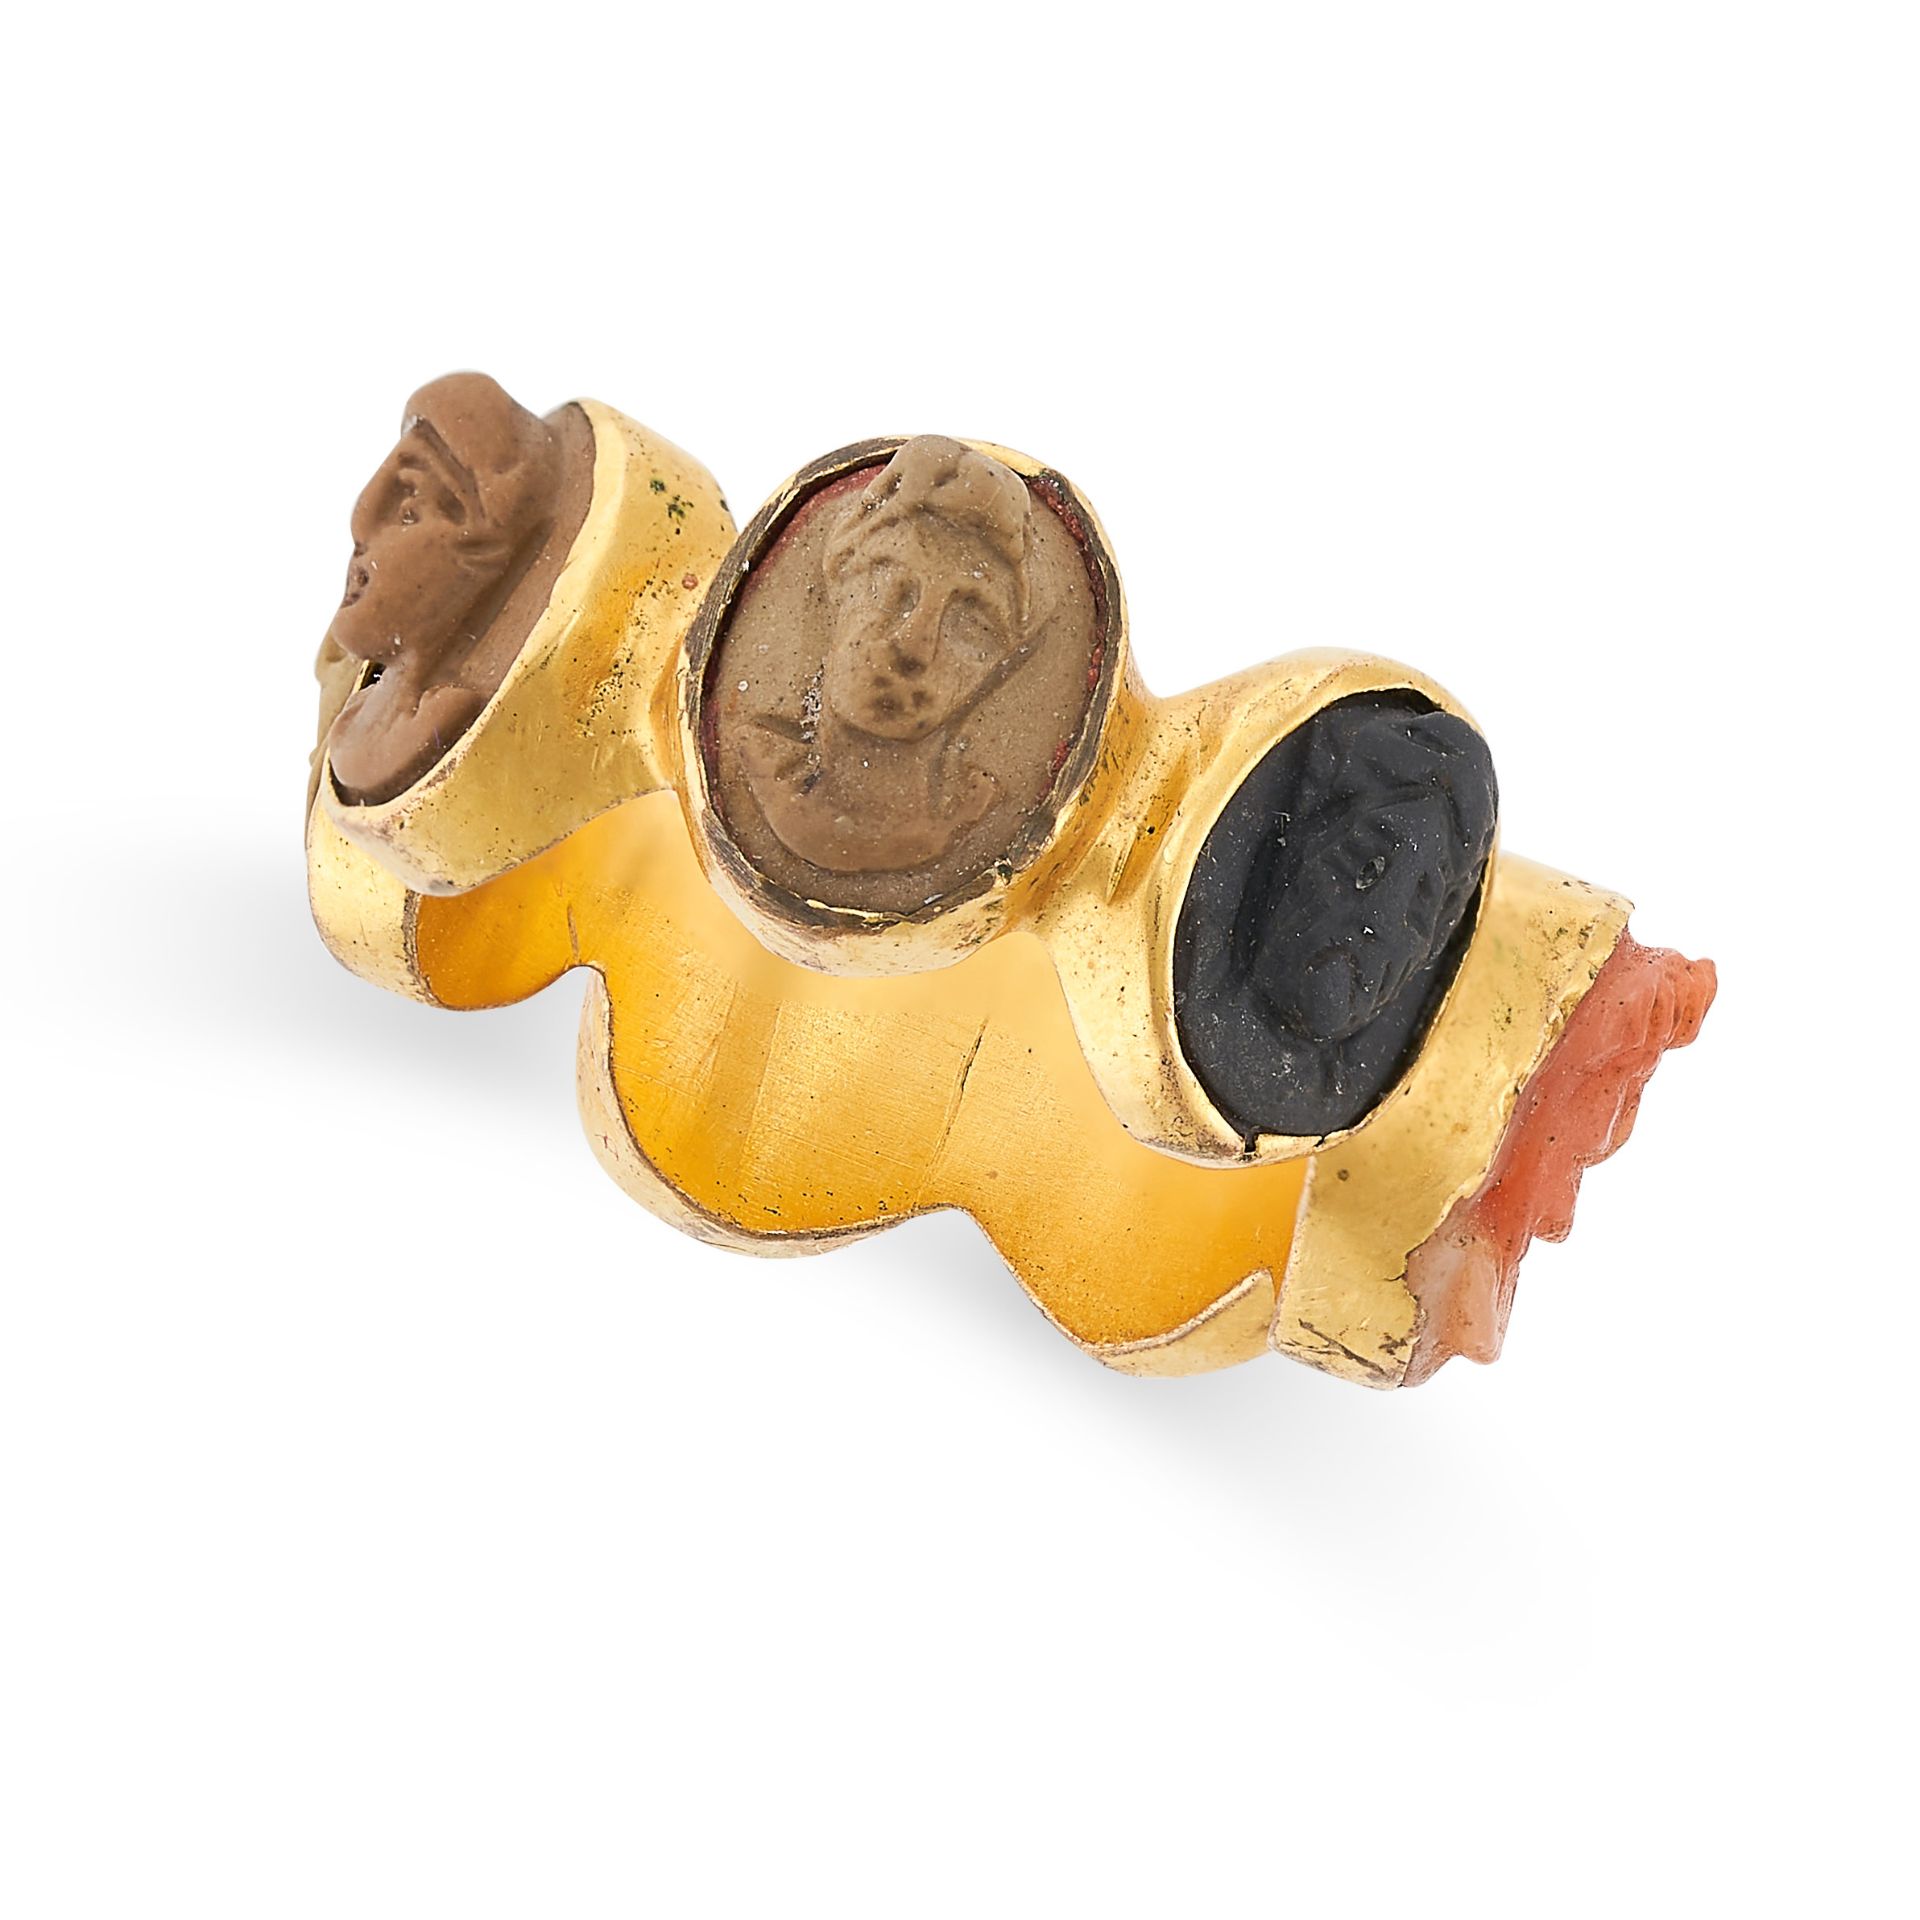 A PAIR OF ANTIQUE LAVA CAMEO RINGS set with carved volcanic lava and coral cameos depicting the - Image 2 of 2